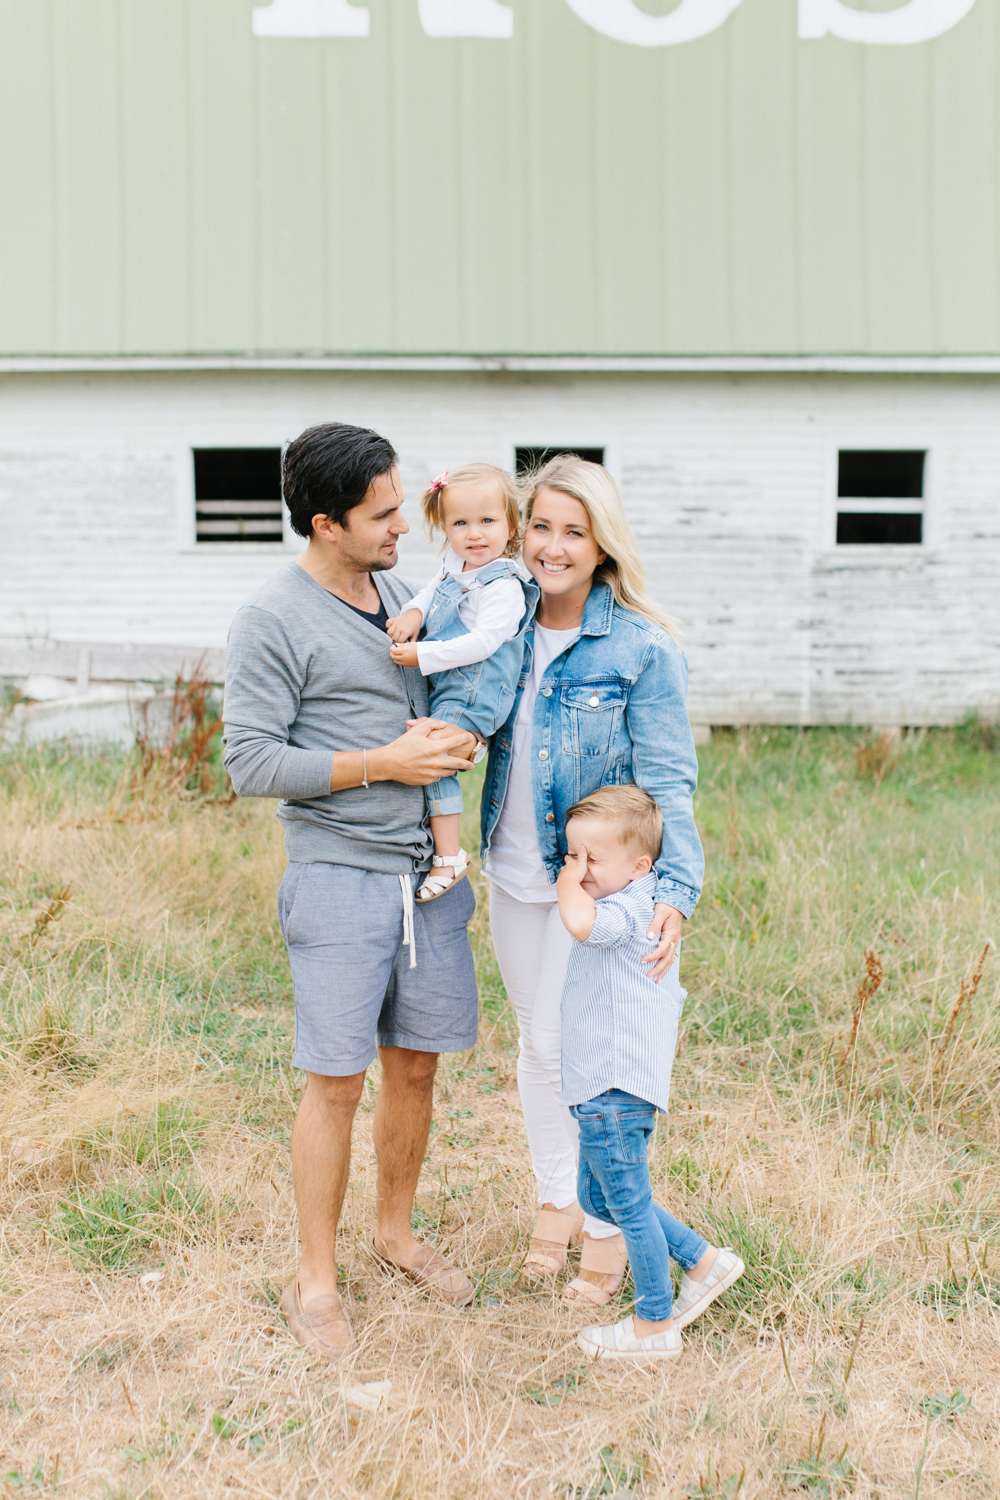 Rose Ranch Family Photo Session | Monika Hibbs Family Session in South Bend, Washington | What to Wear for Family Pictures | Pacific Northwest Family Session with Emma Rose Company-15.jpg